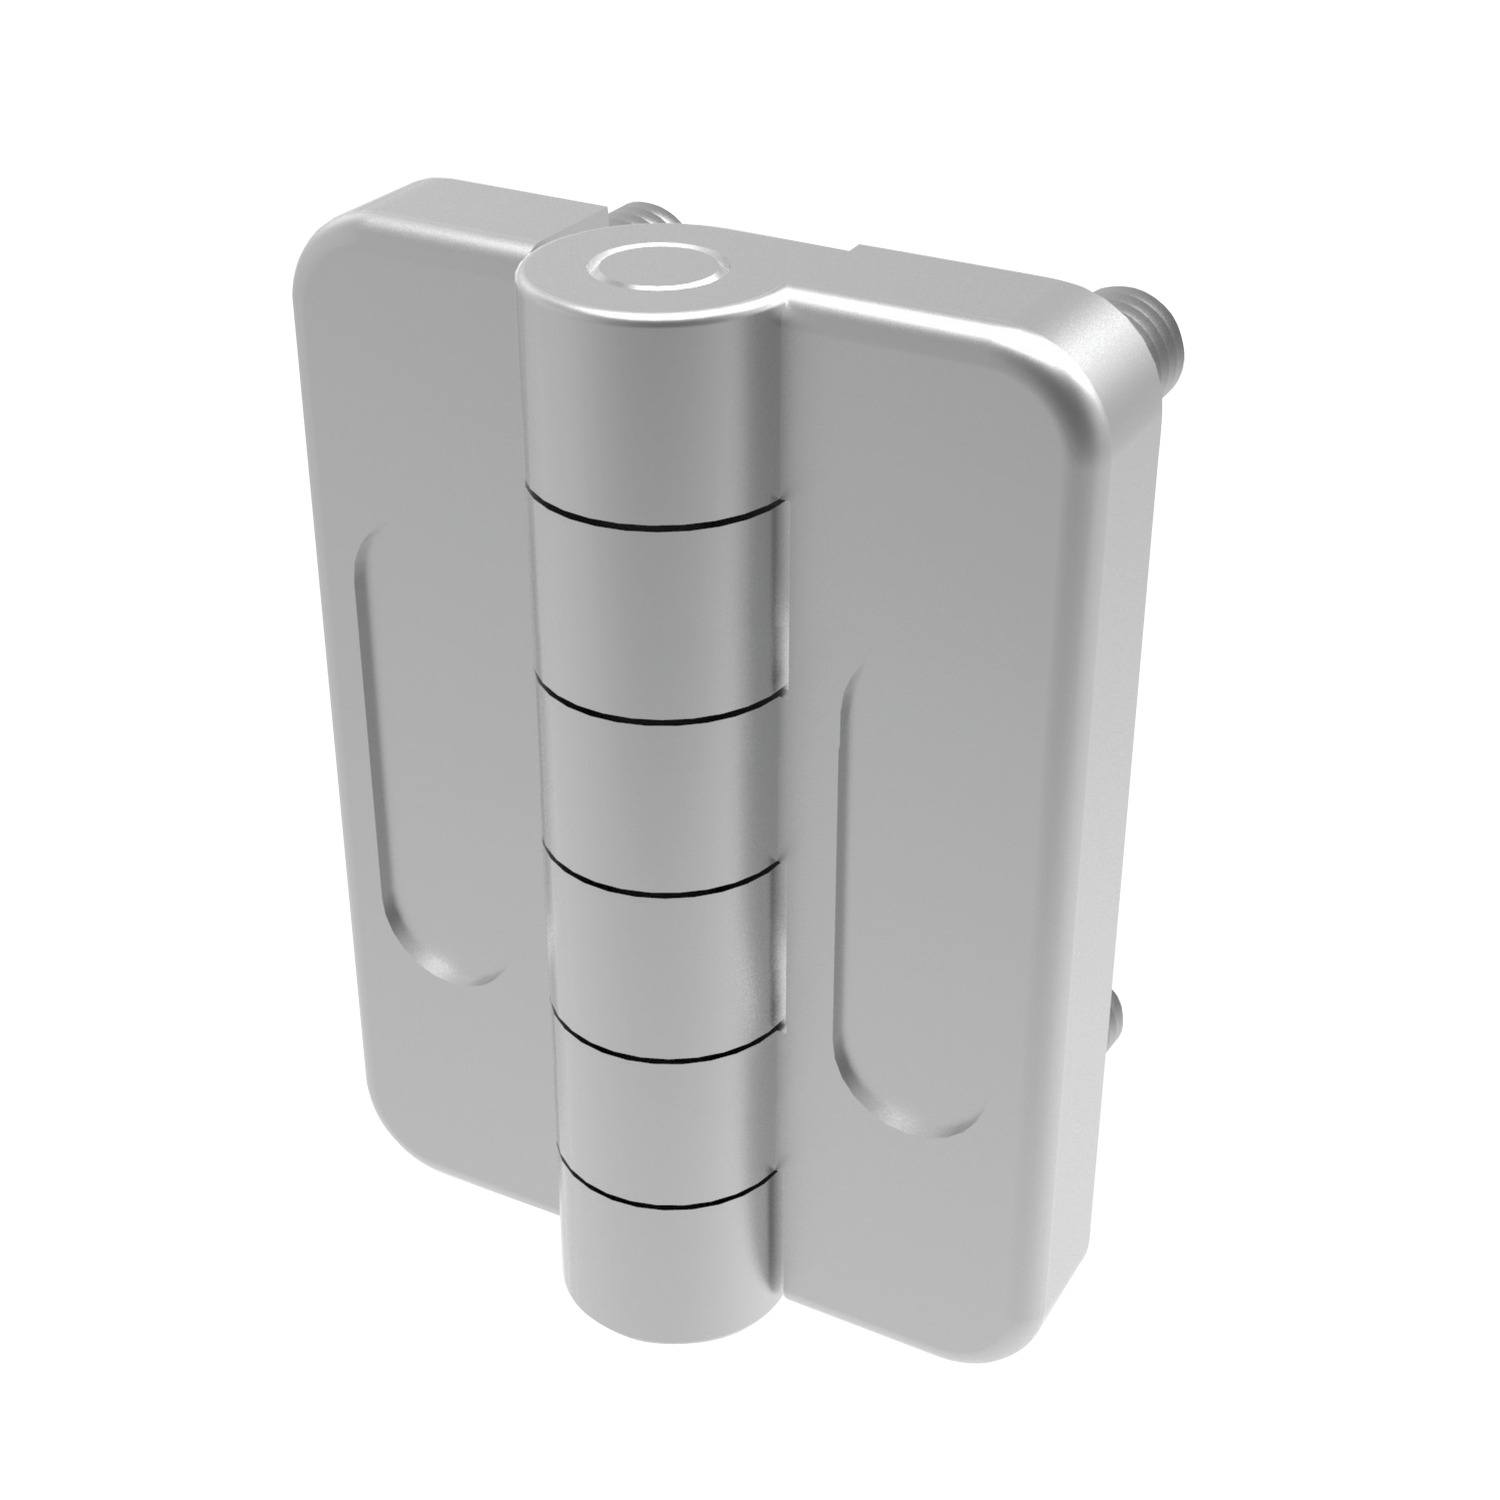 Surface Mount - Leaf Hinges Surface mount leaf hinges - Integrated. Available in a chrome finish or black coated.